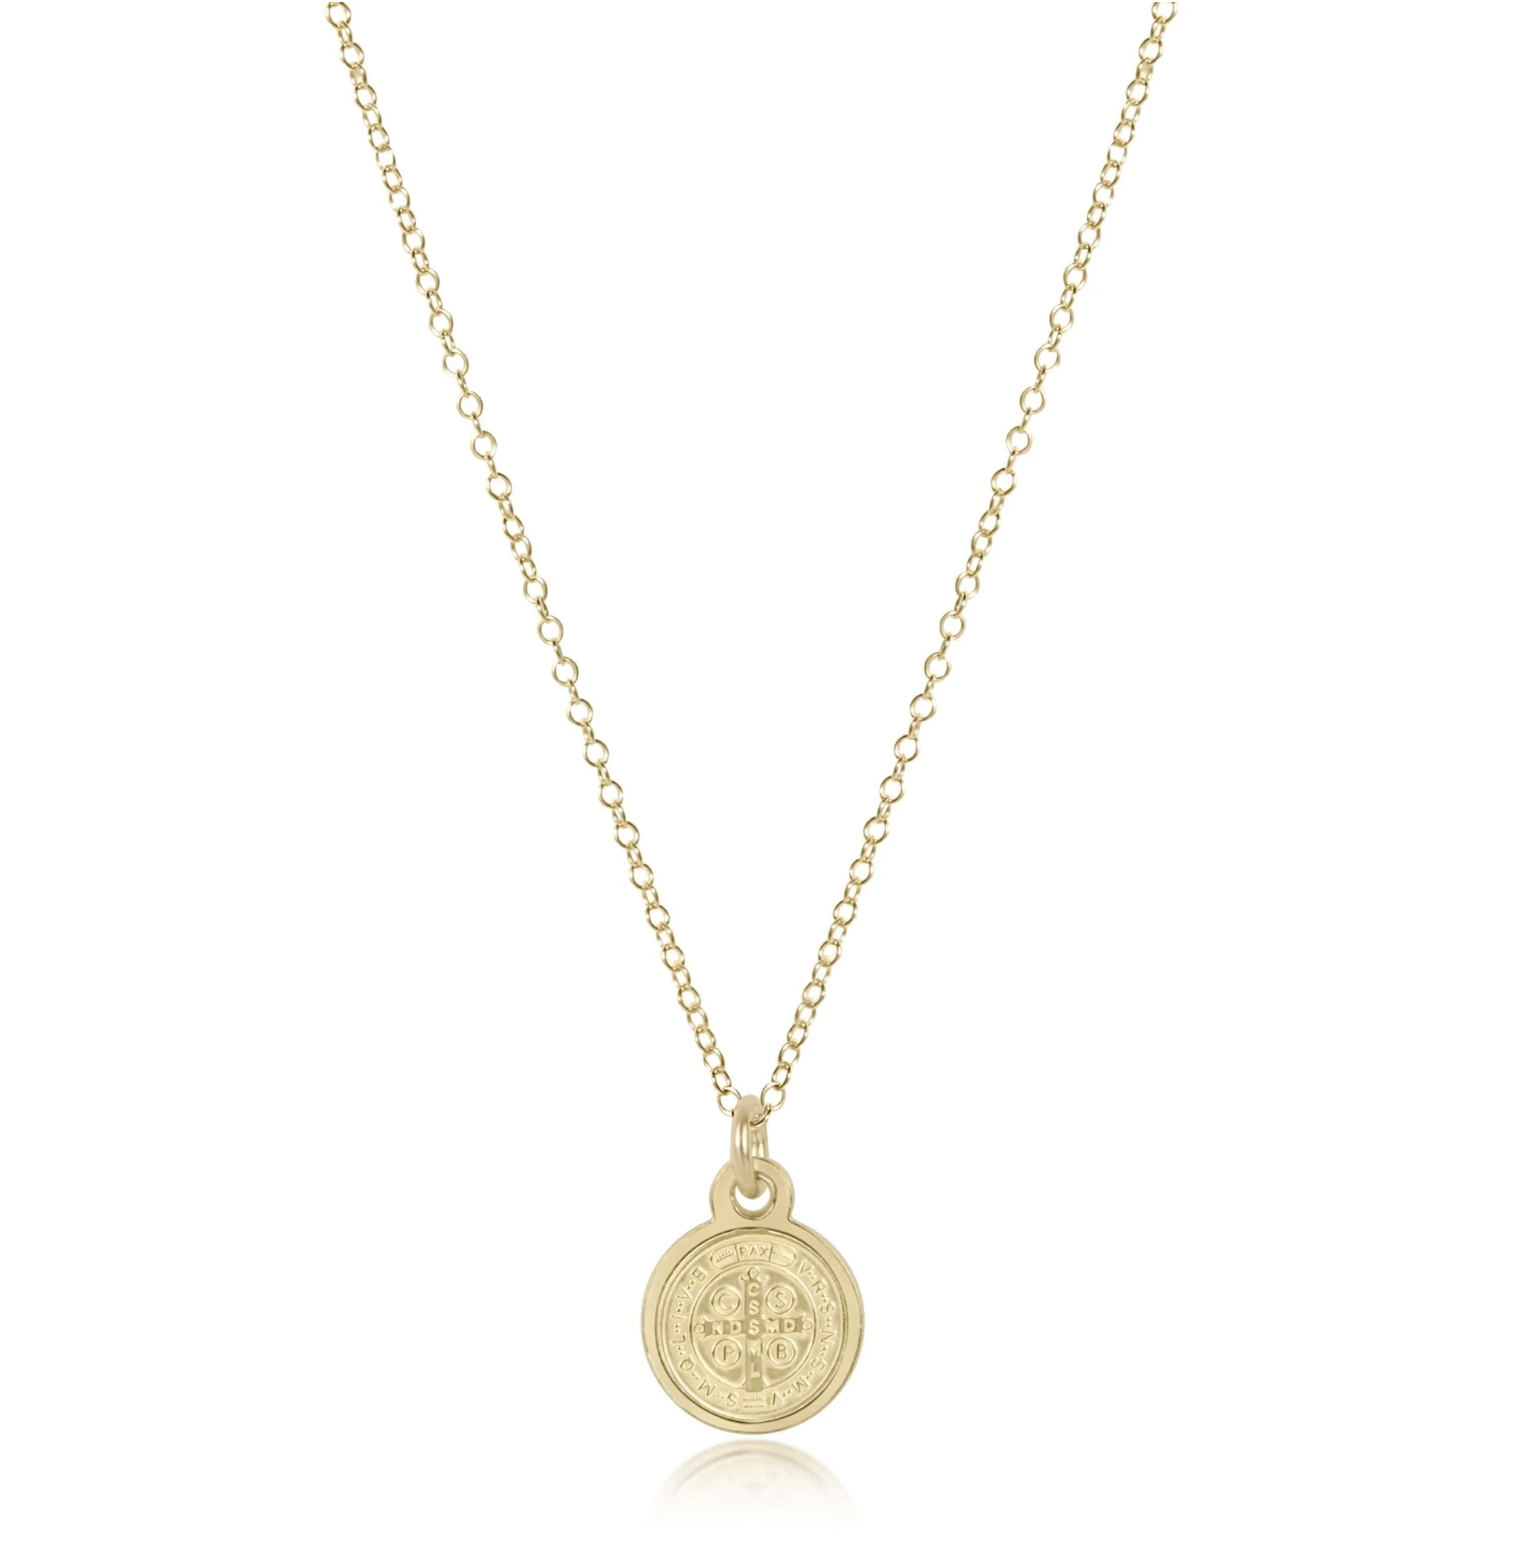 ENEWTON 16" NECKLACE GOLD-BLESSING SMALL GOLD DISC